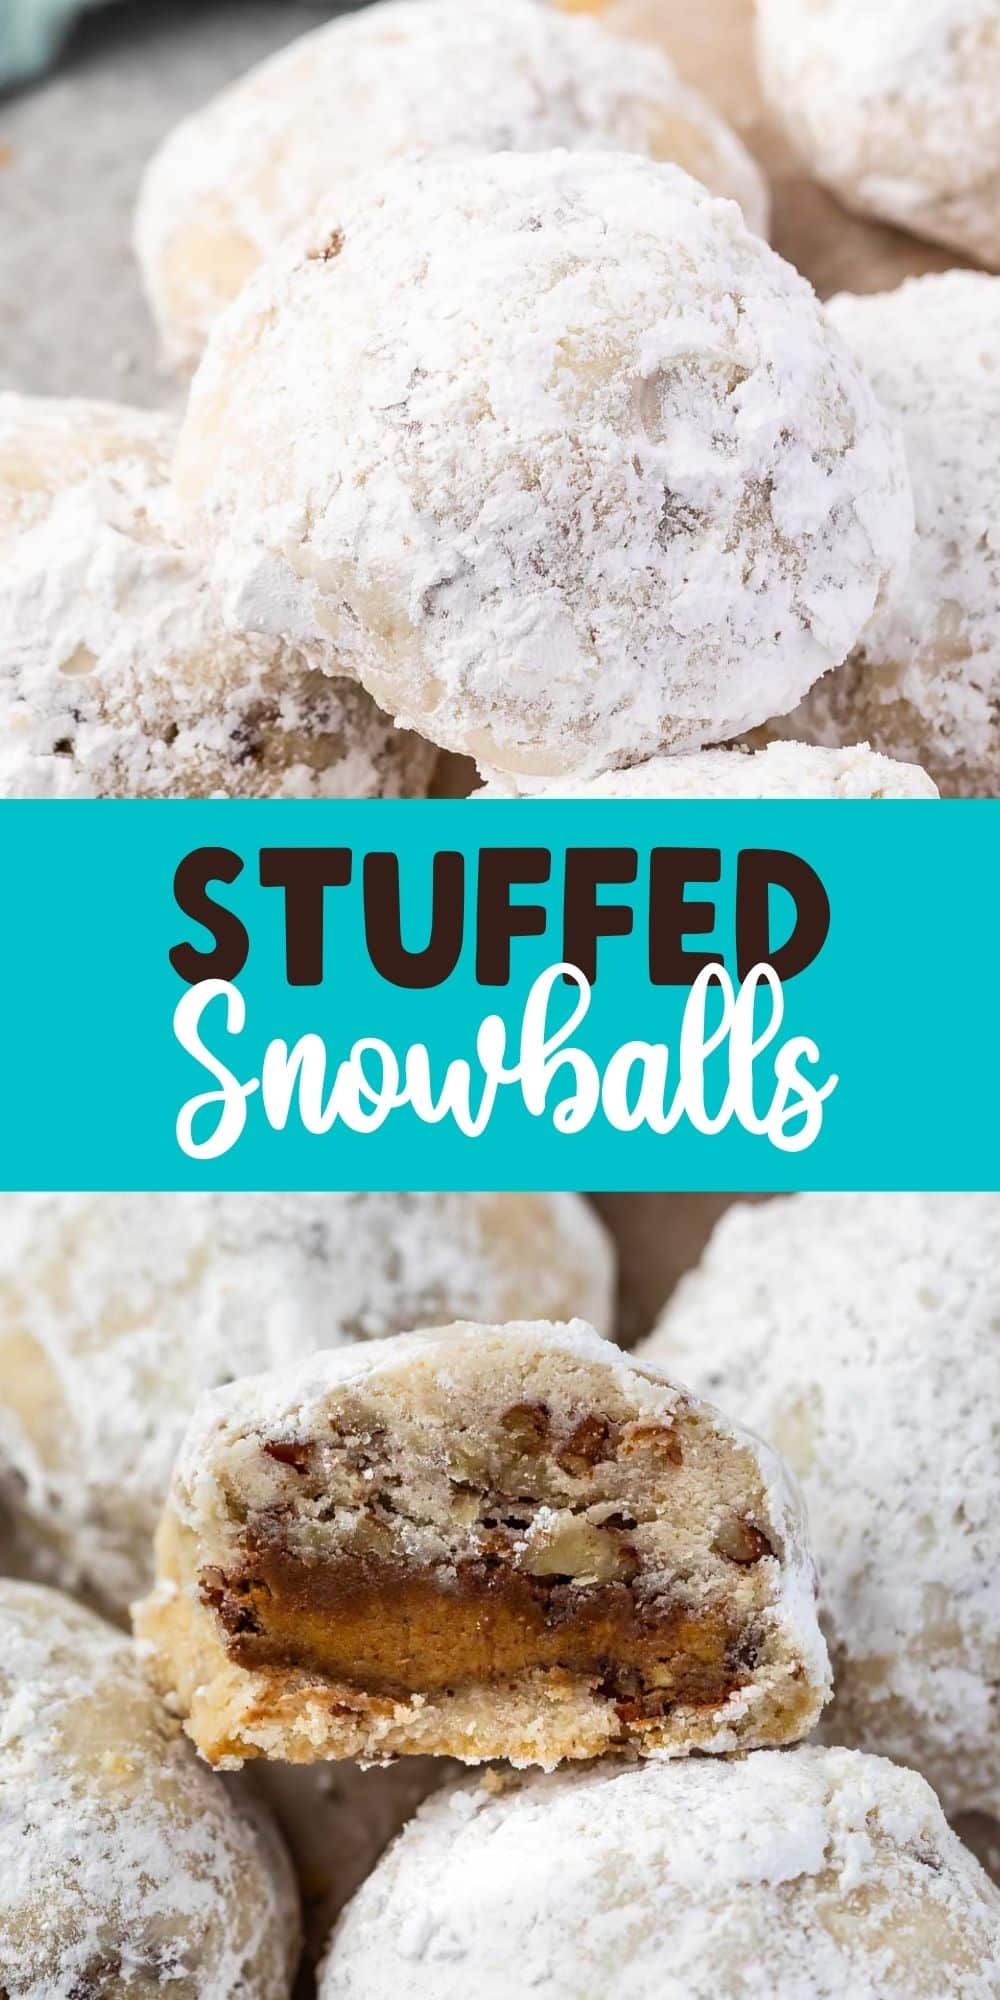 two photos showing the snowballs with one cut in half and one full snowball covered in powdered sugar with words in the middle